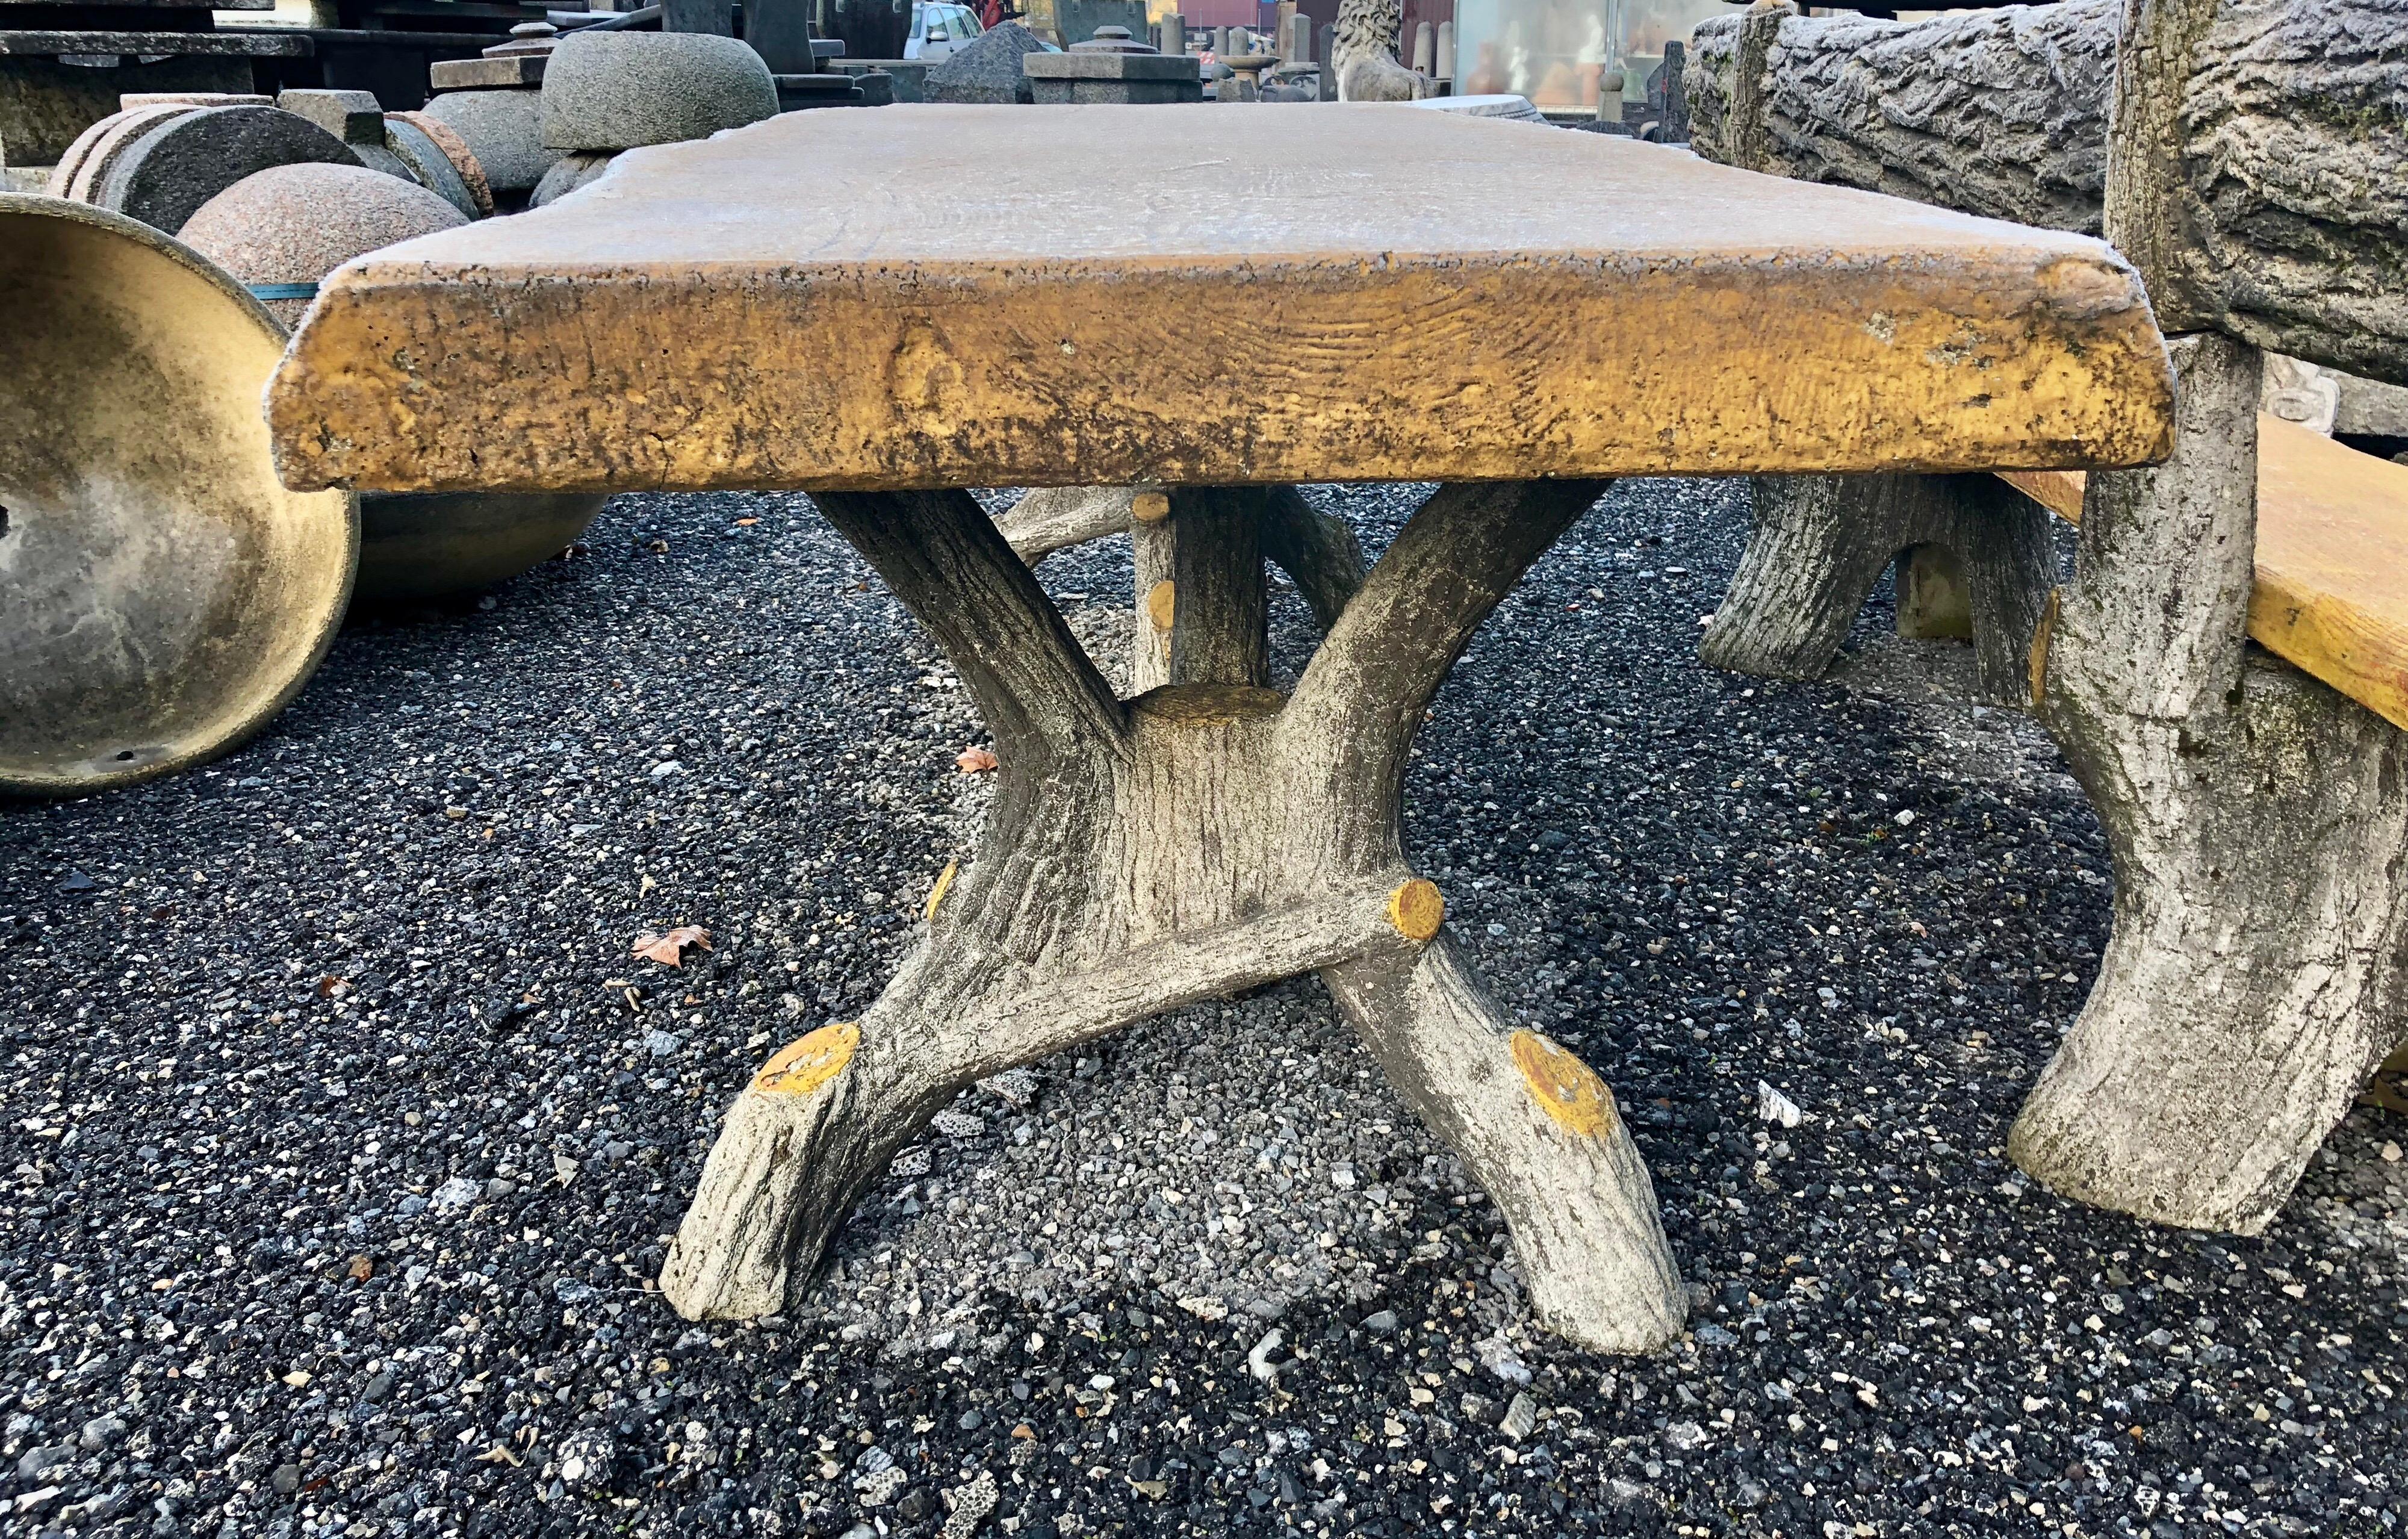 Garden table made of molded and painted concrete that look like a tree. Made in France in the 20th century.
There is also a bench available in the same style. For the table and the bench the price is special: Eur 7000
The top is yellow painted,